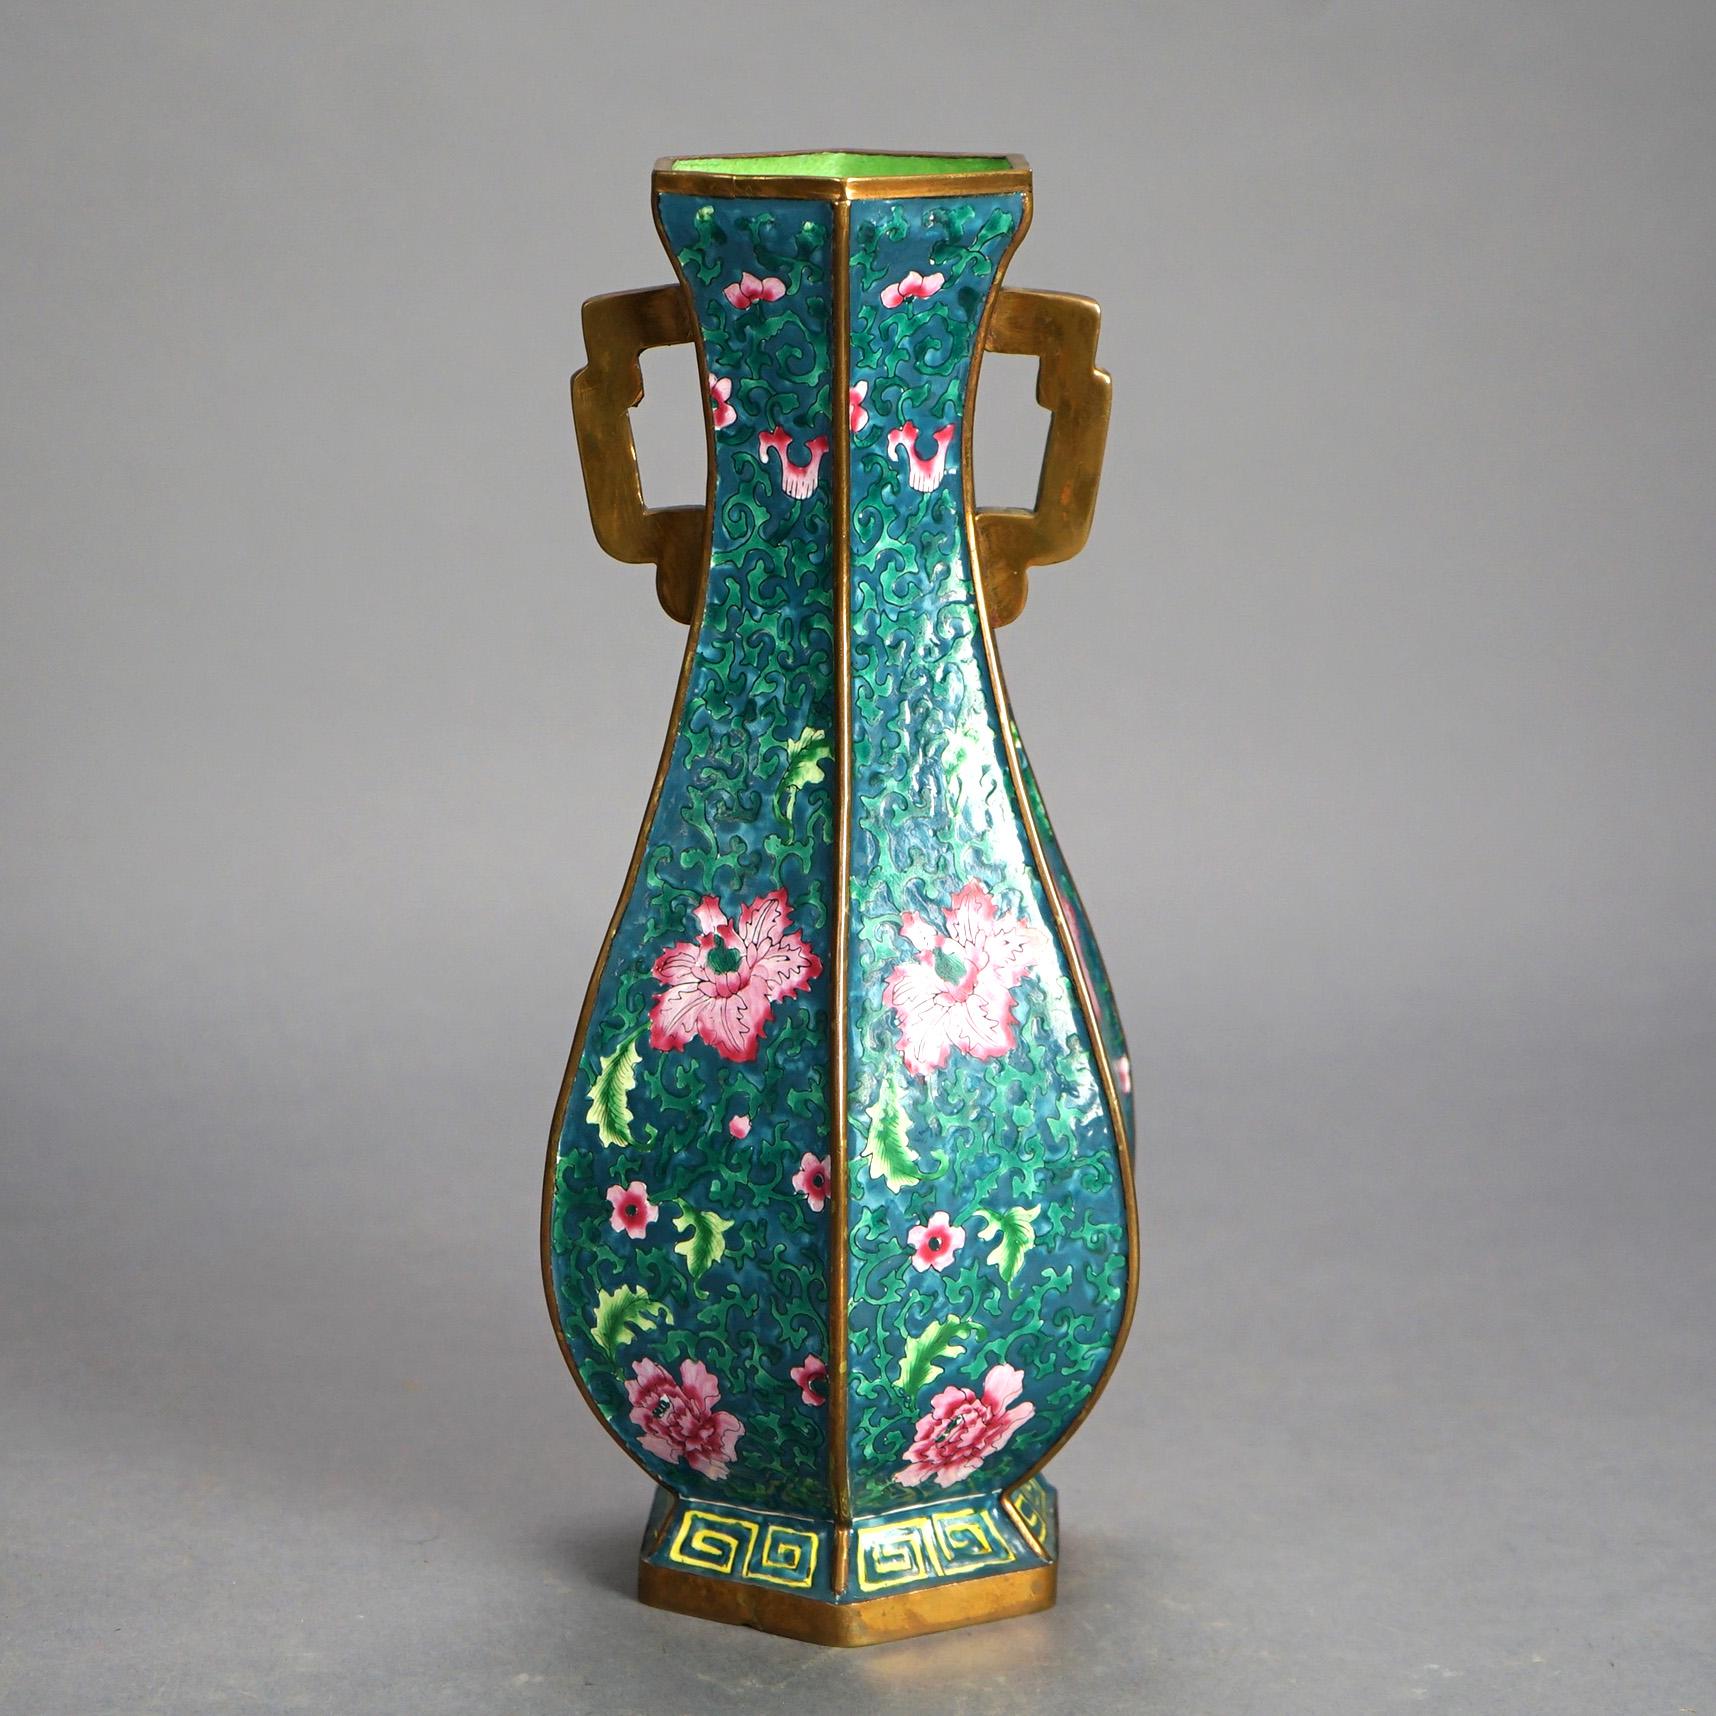 Chinese Bronze Faceted & Handled Vase with Enameled Floral Design 20thC

Measures - 12